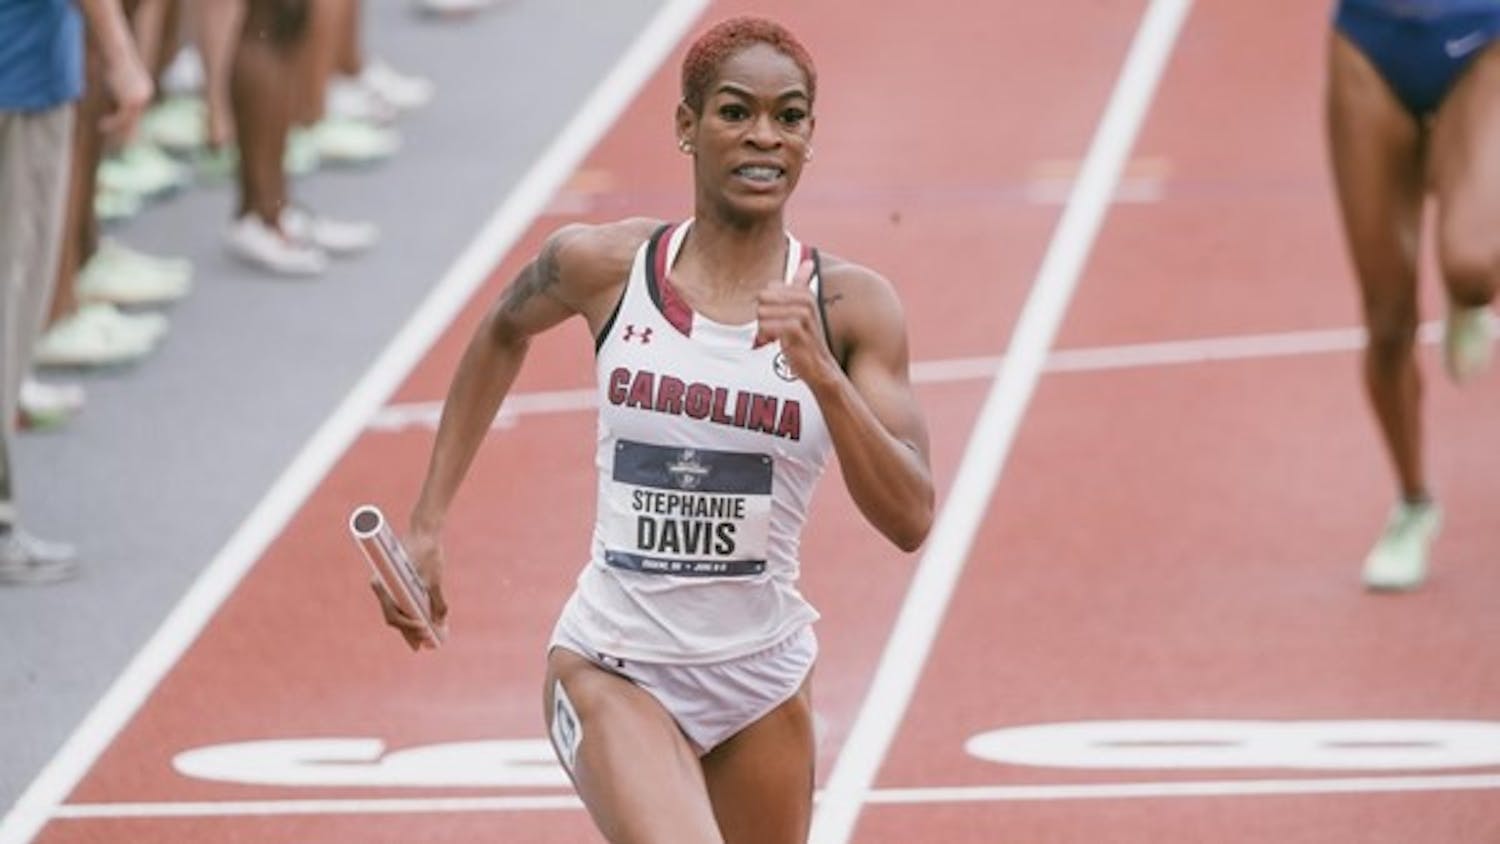 A picture of graduate sprinter Stephanie Davis at the NCAA track and field national championships. Davis competed in the 4x400-meter relay team and earned First Team All-American honors.